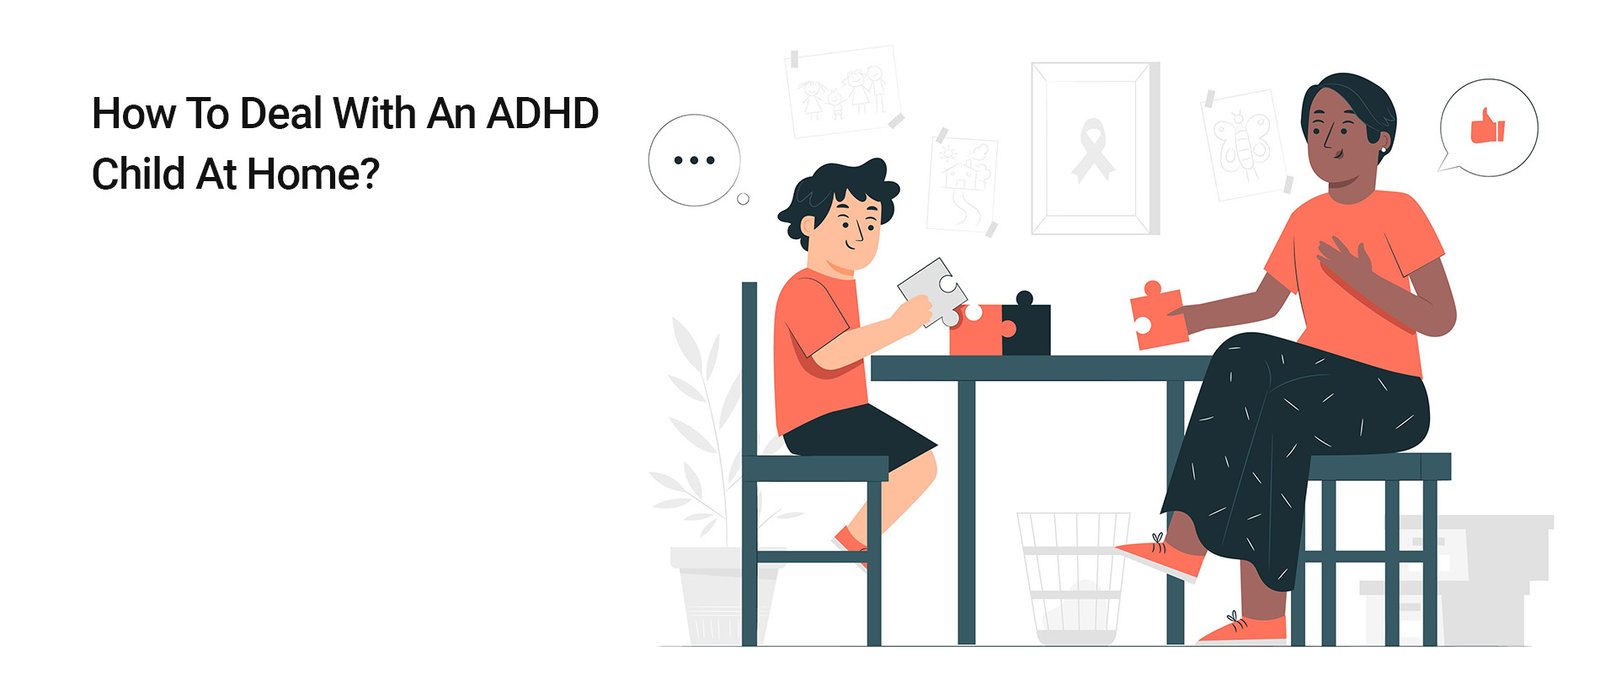 How To Deal With An ADHD Child At Home